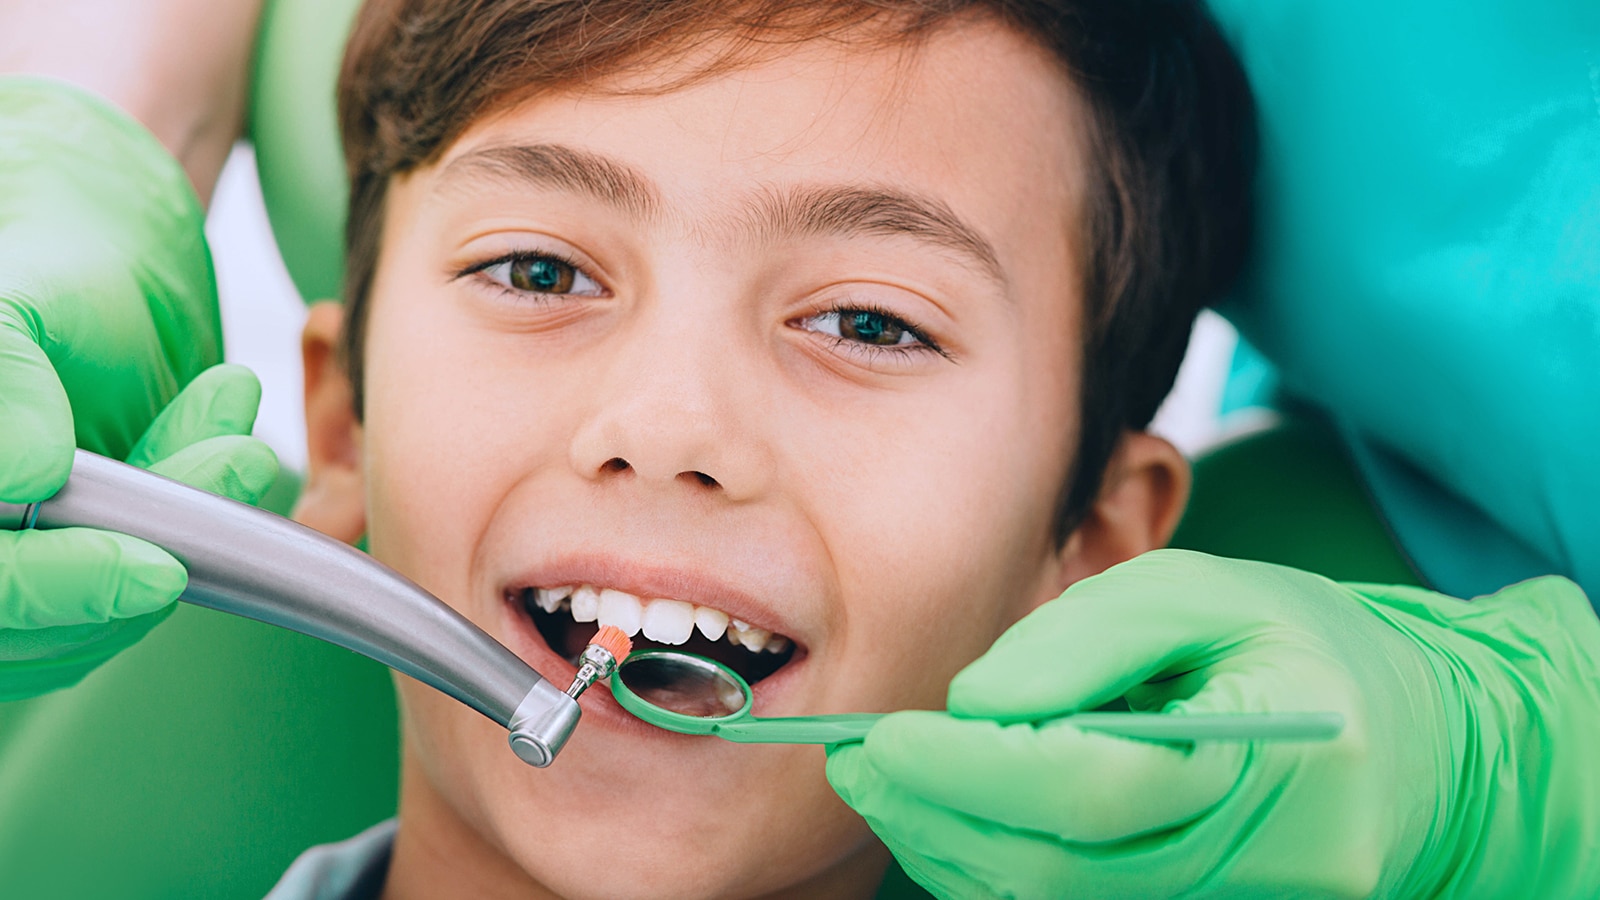 Child getting a dental cleaning Photo